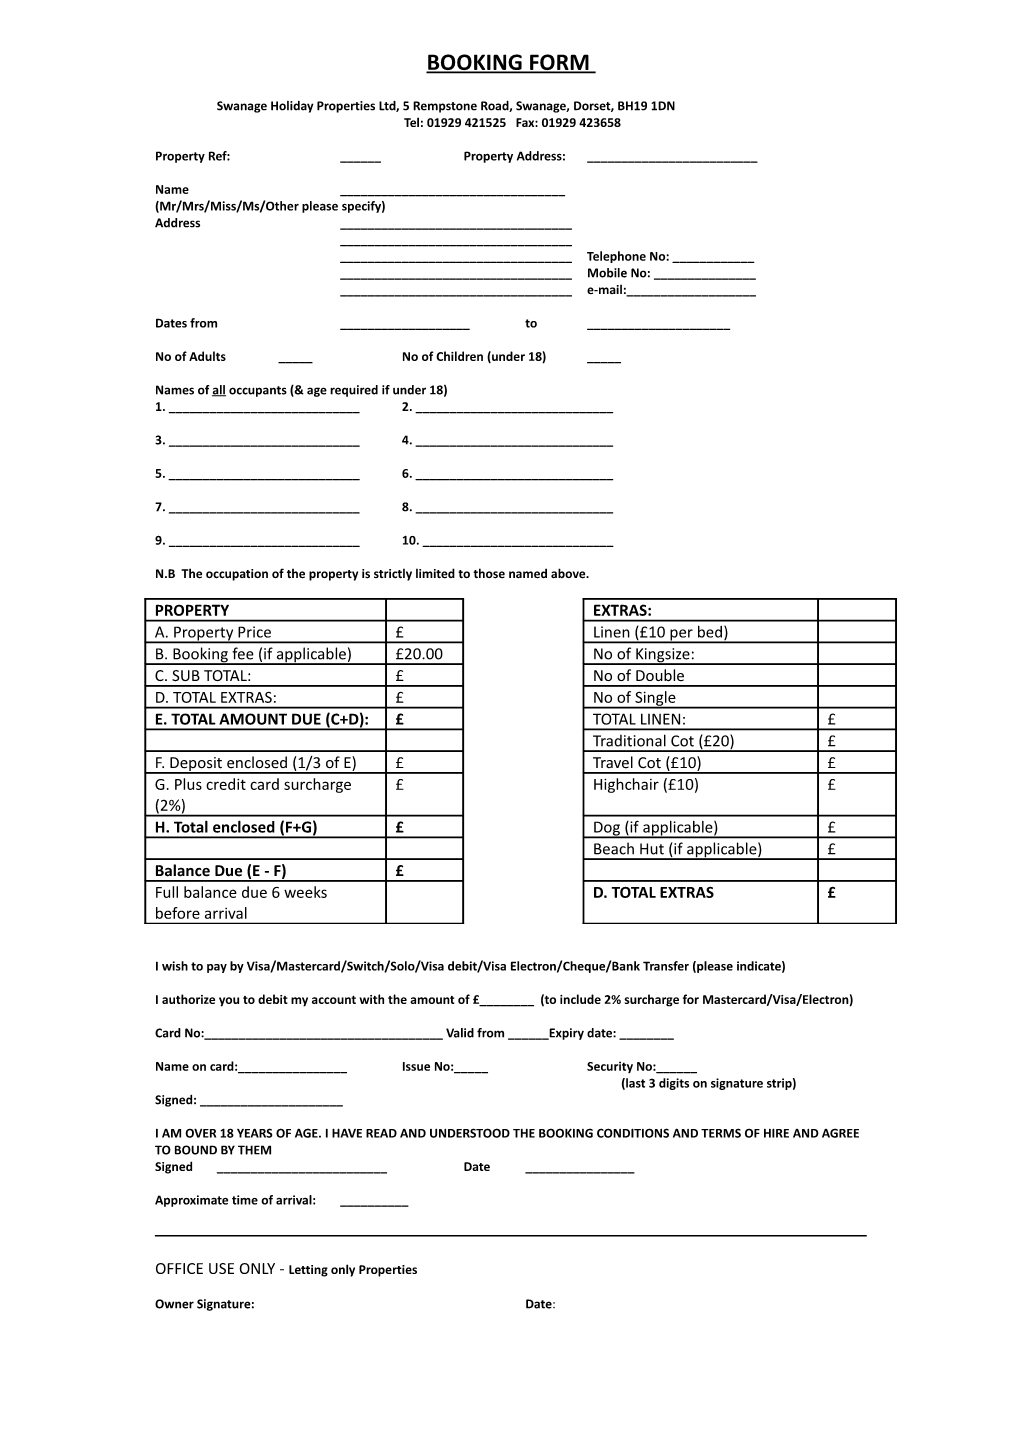 Booking Form for Managed Properties